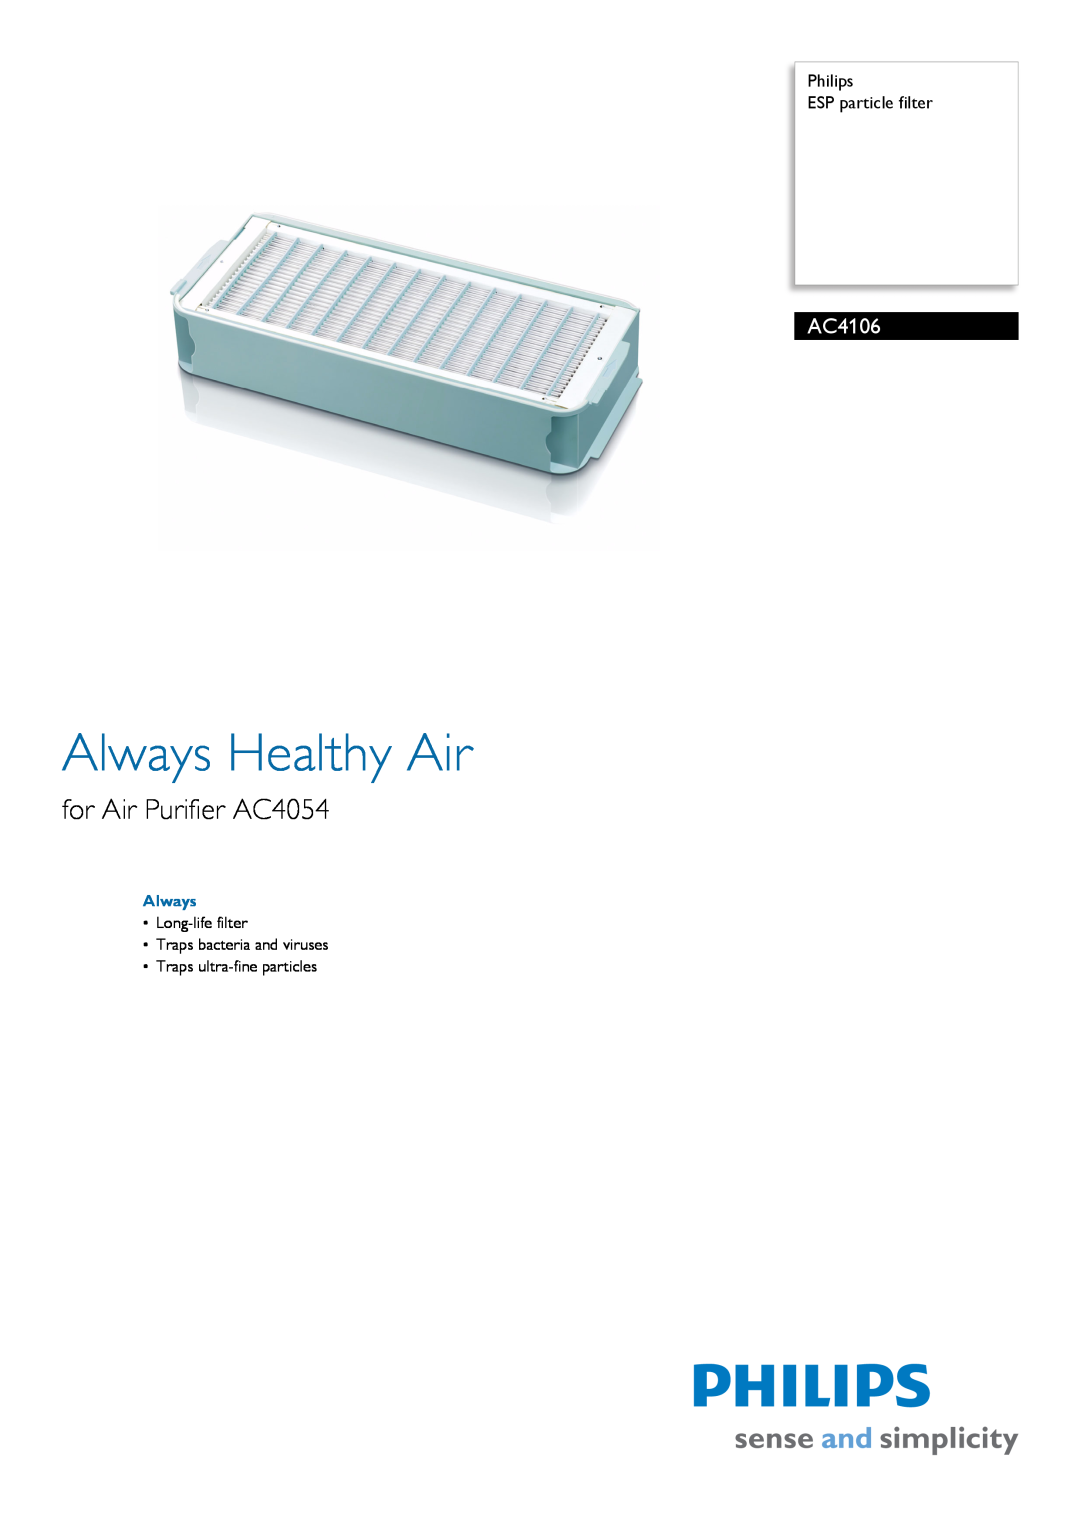 Philips AC4106/00 manual Philips ESP particle filter, Always Healthy Air, for Air Purifier AC4054 